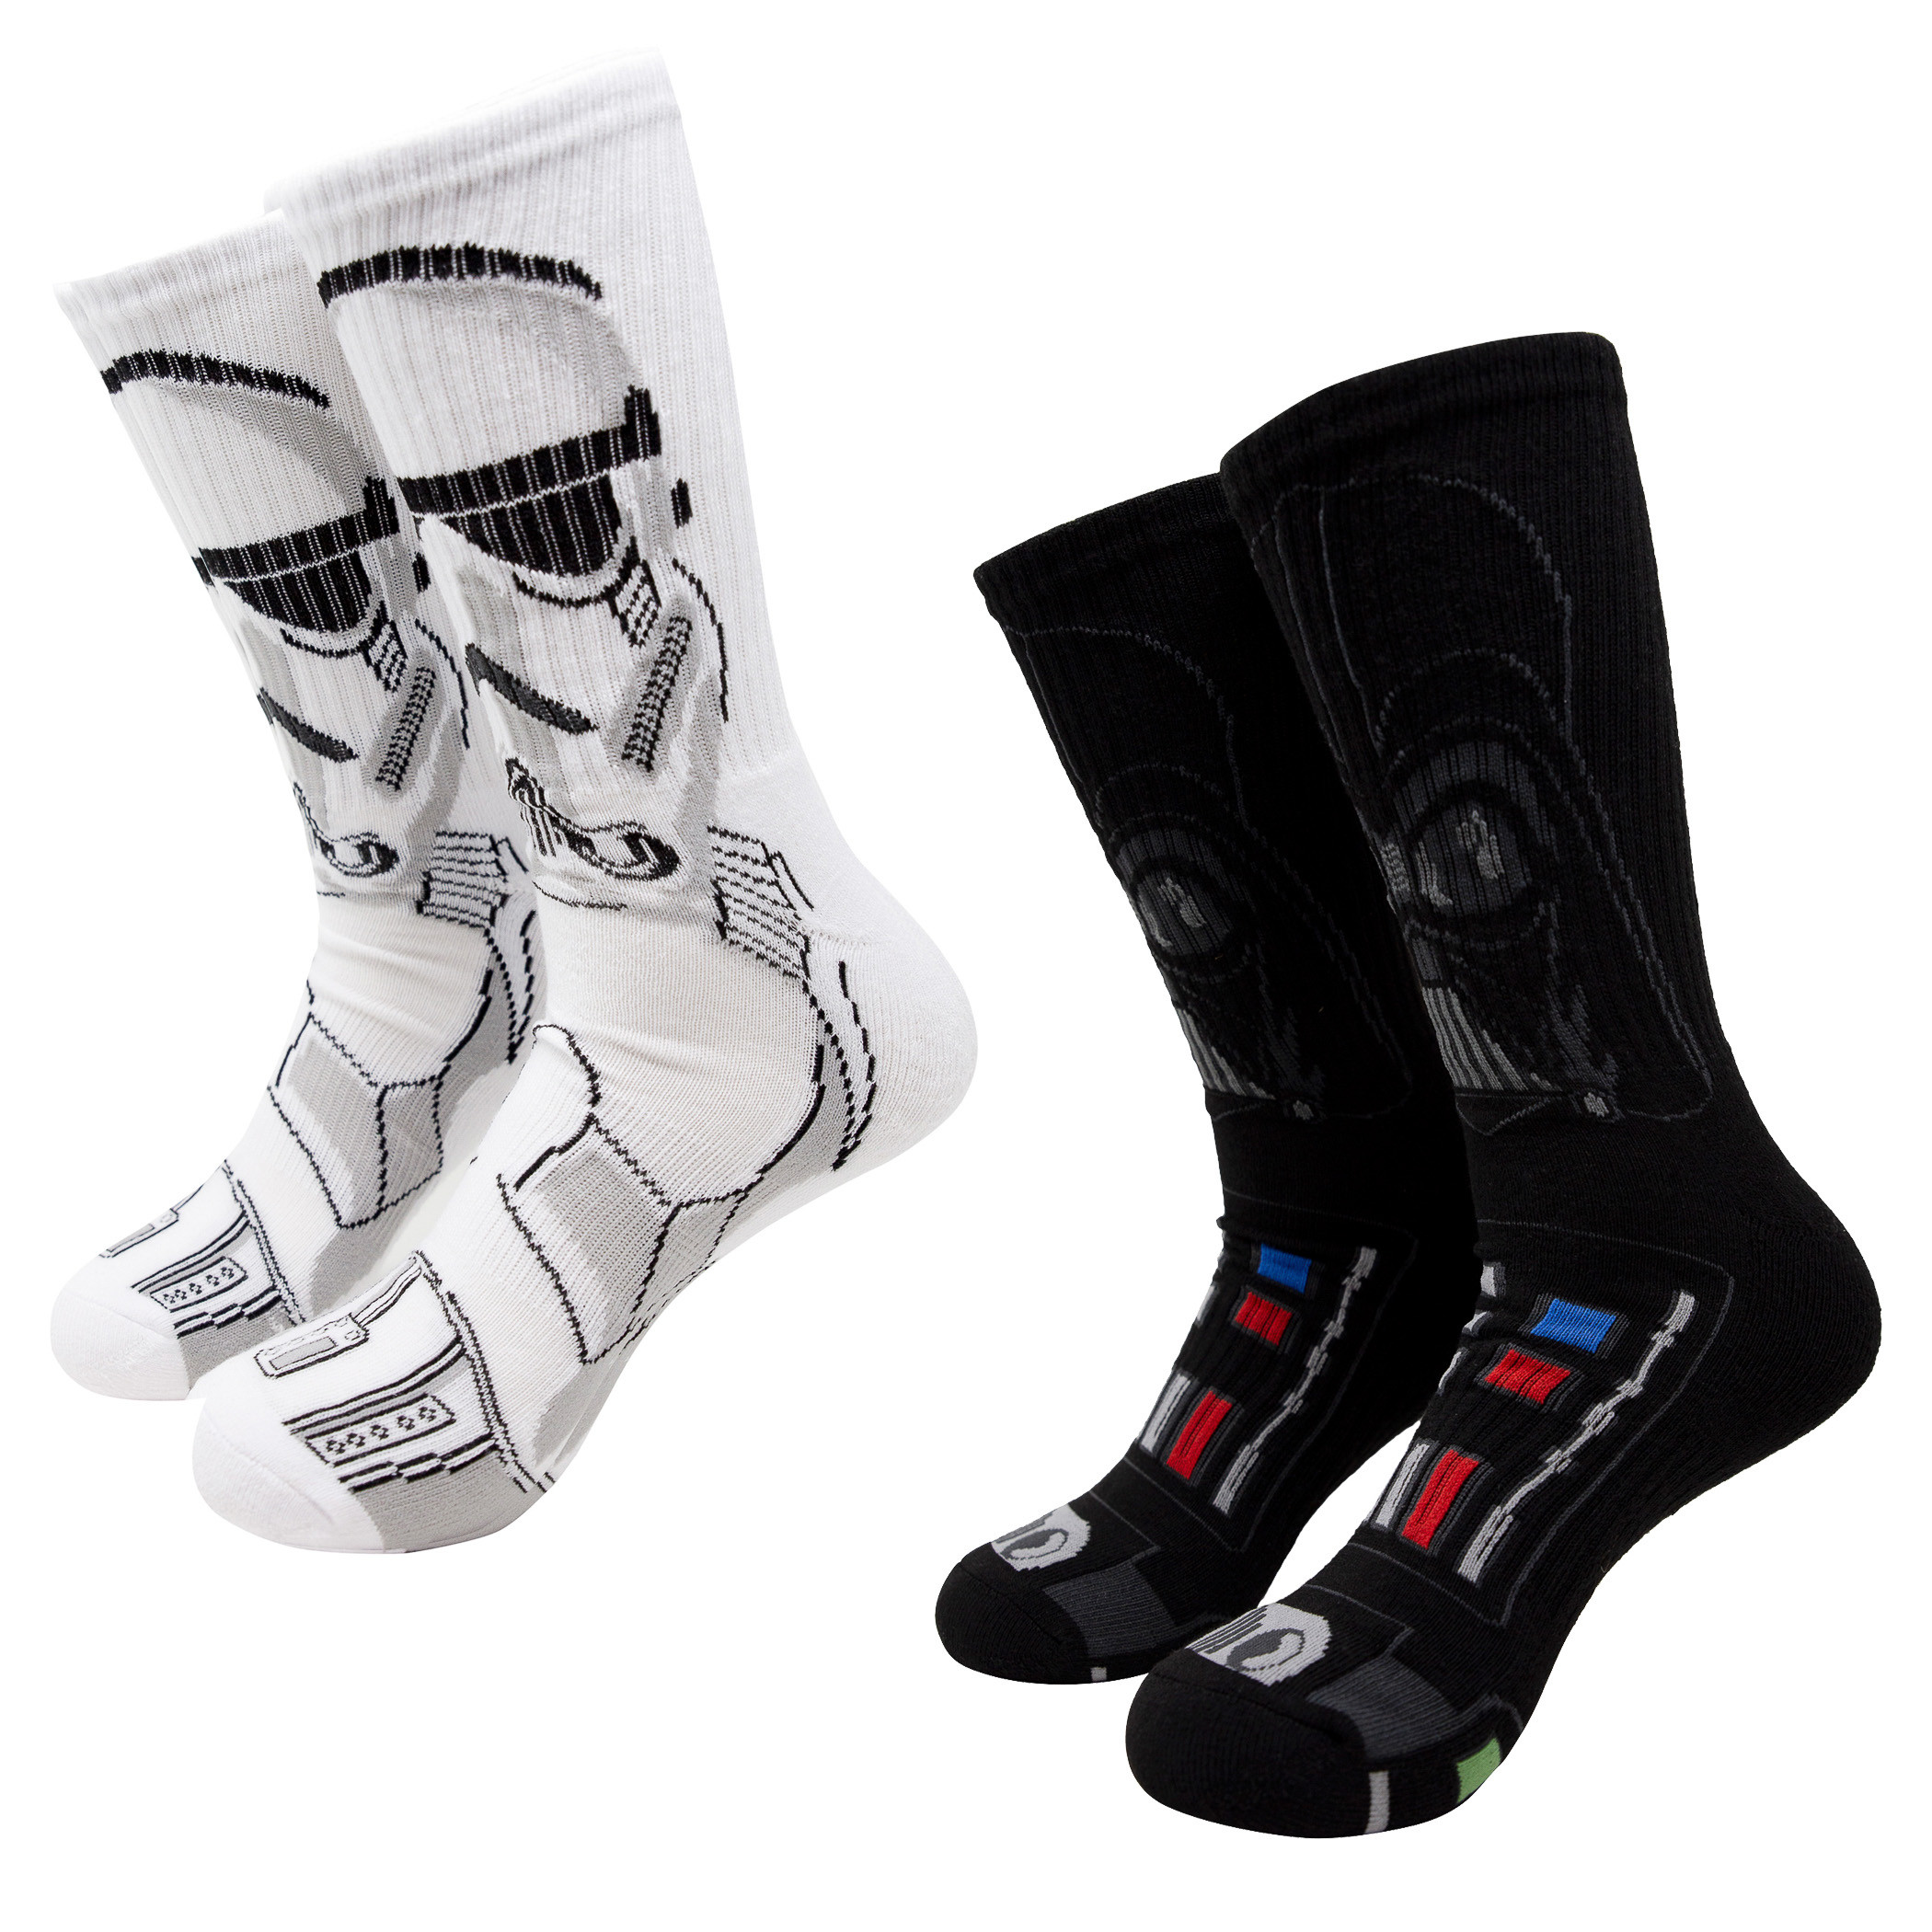 FEATURING KYLO REN AND STORMTROOPER Star Wars 2 Pack CREW SOCKS FOR BOYS 